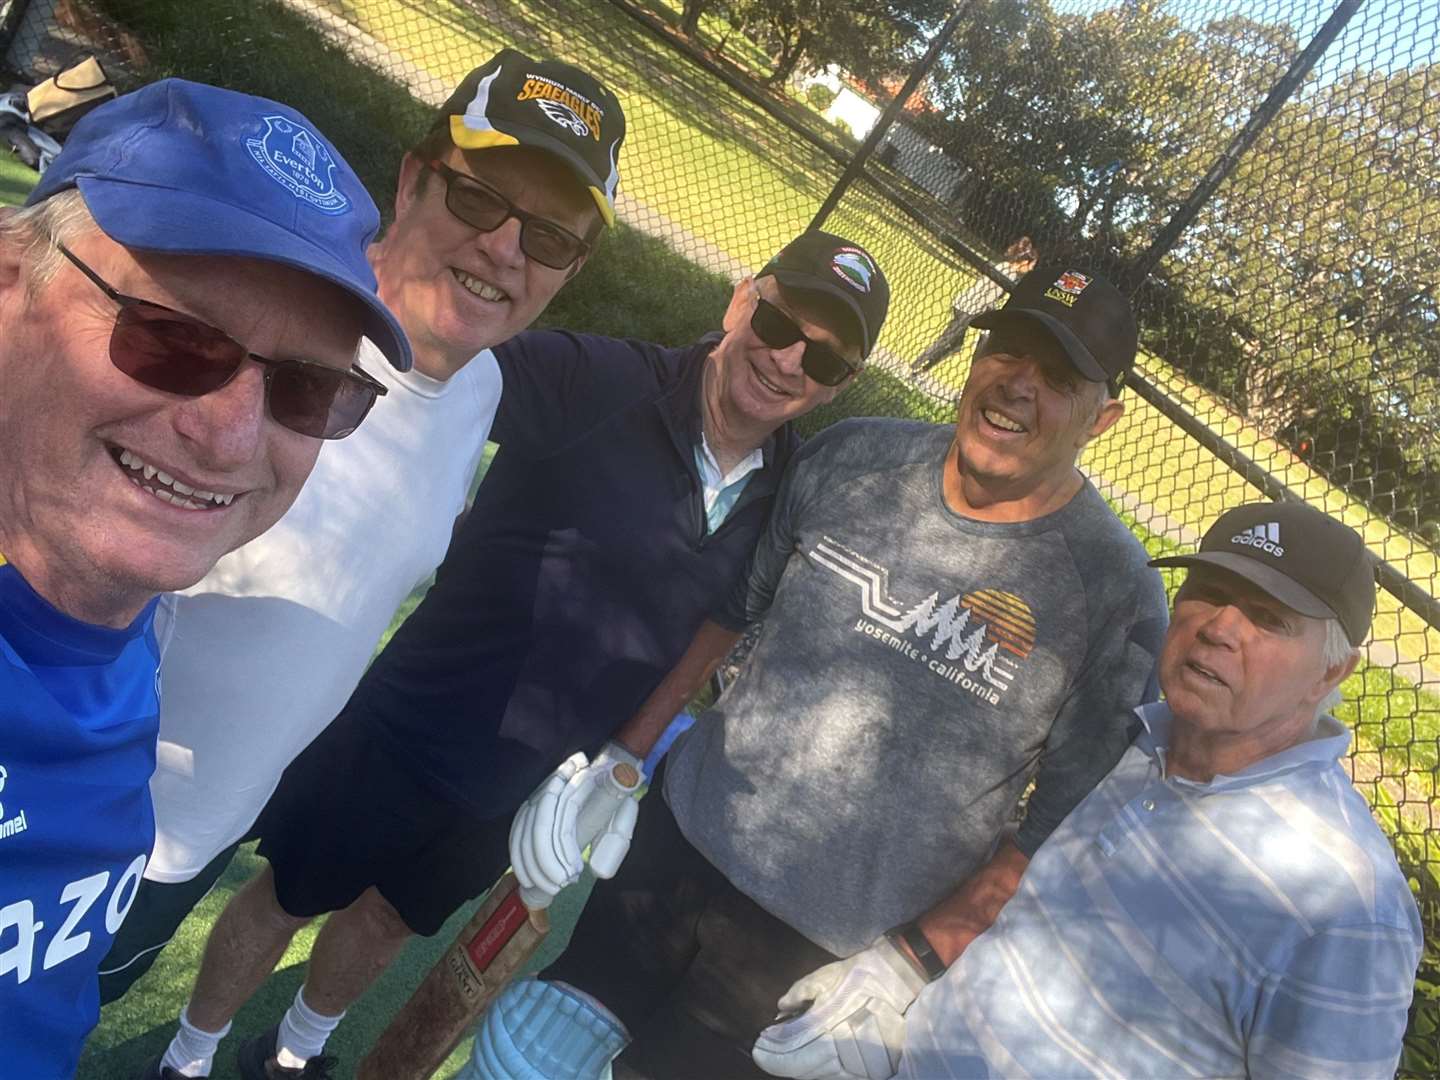 From left, UNSW cricketers Martin Palin, Peter Godber and John Gallagher, who played at Sibton Park in 1988, Glenn Clark, who played for Hythe in 1984, and Jim Robson, who played for Hythe in 1985